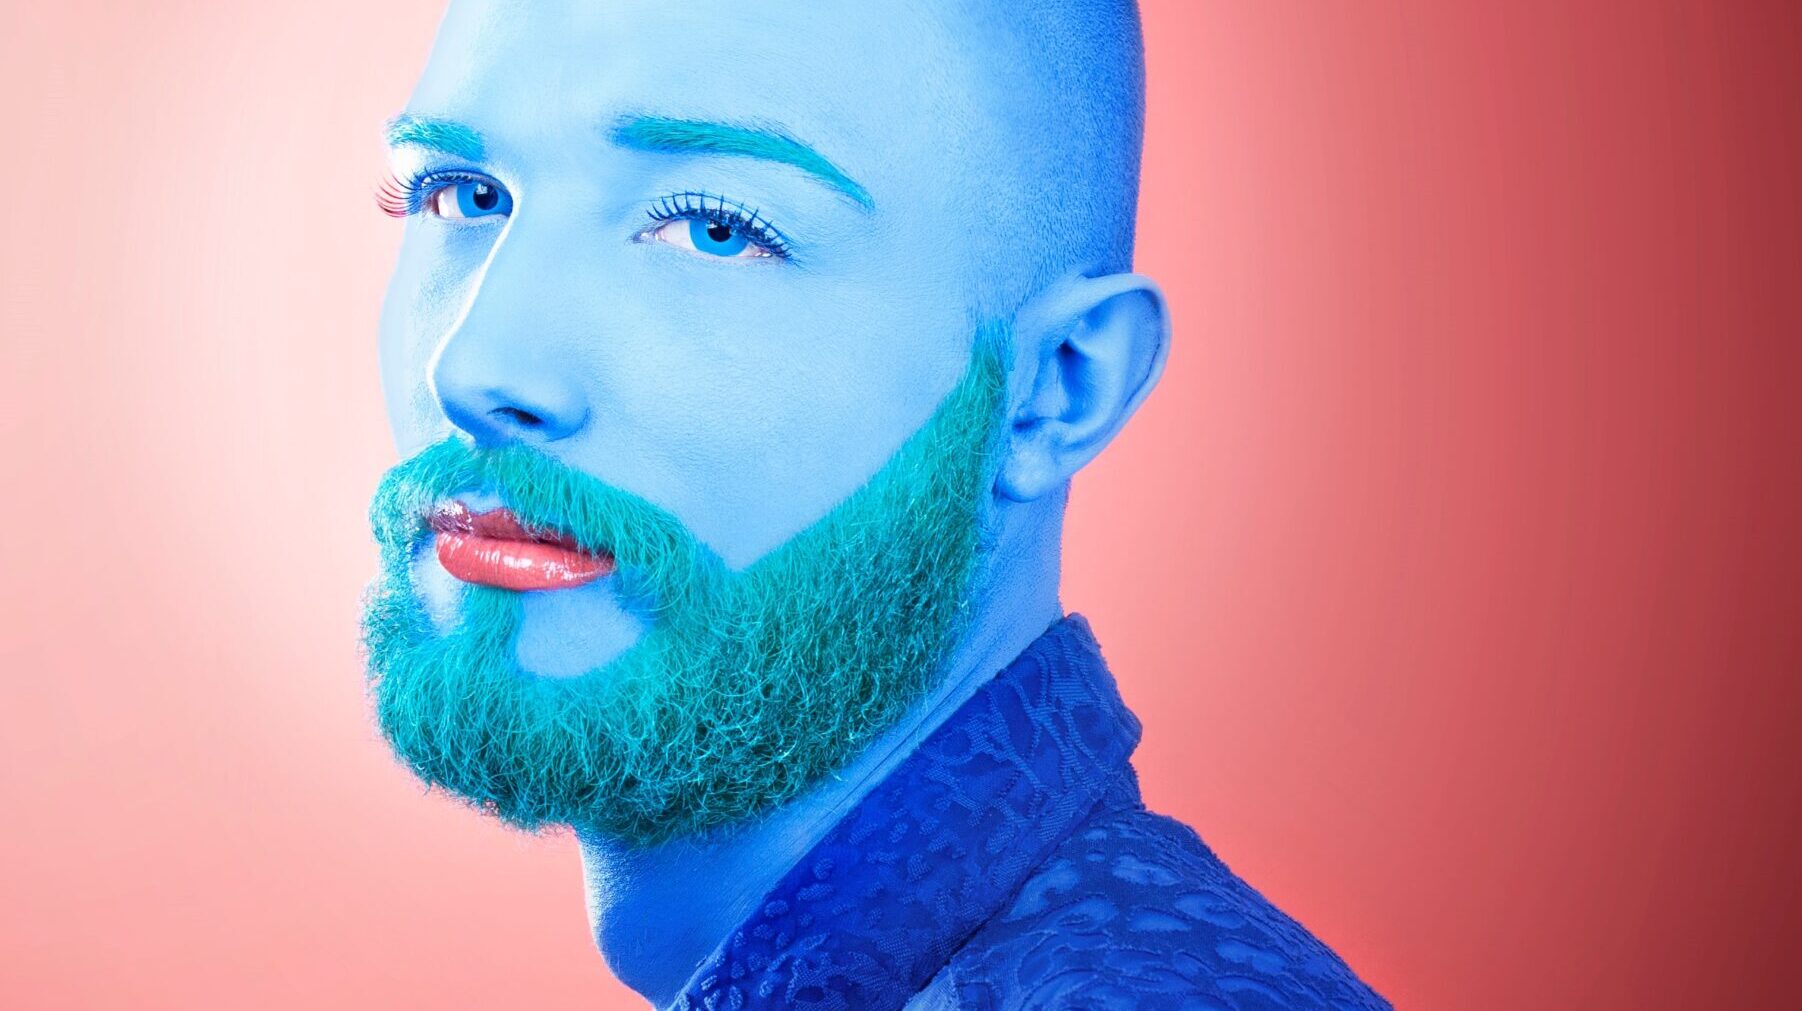 A white man in a blue shirt sits infront of a red background. He face and beard are painted blue, and he has pink lipstick on.